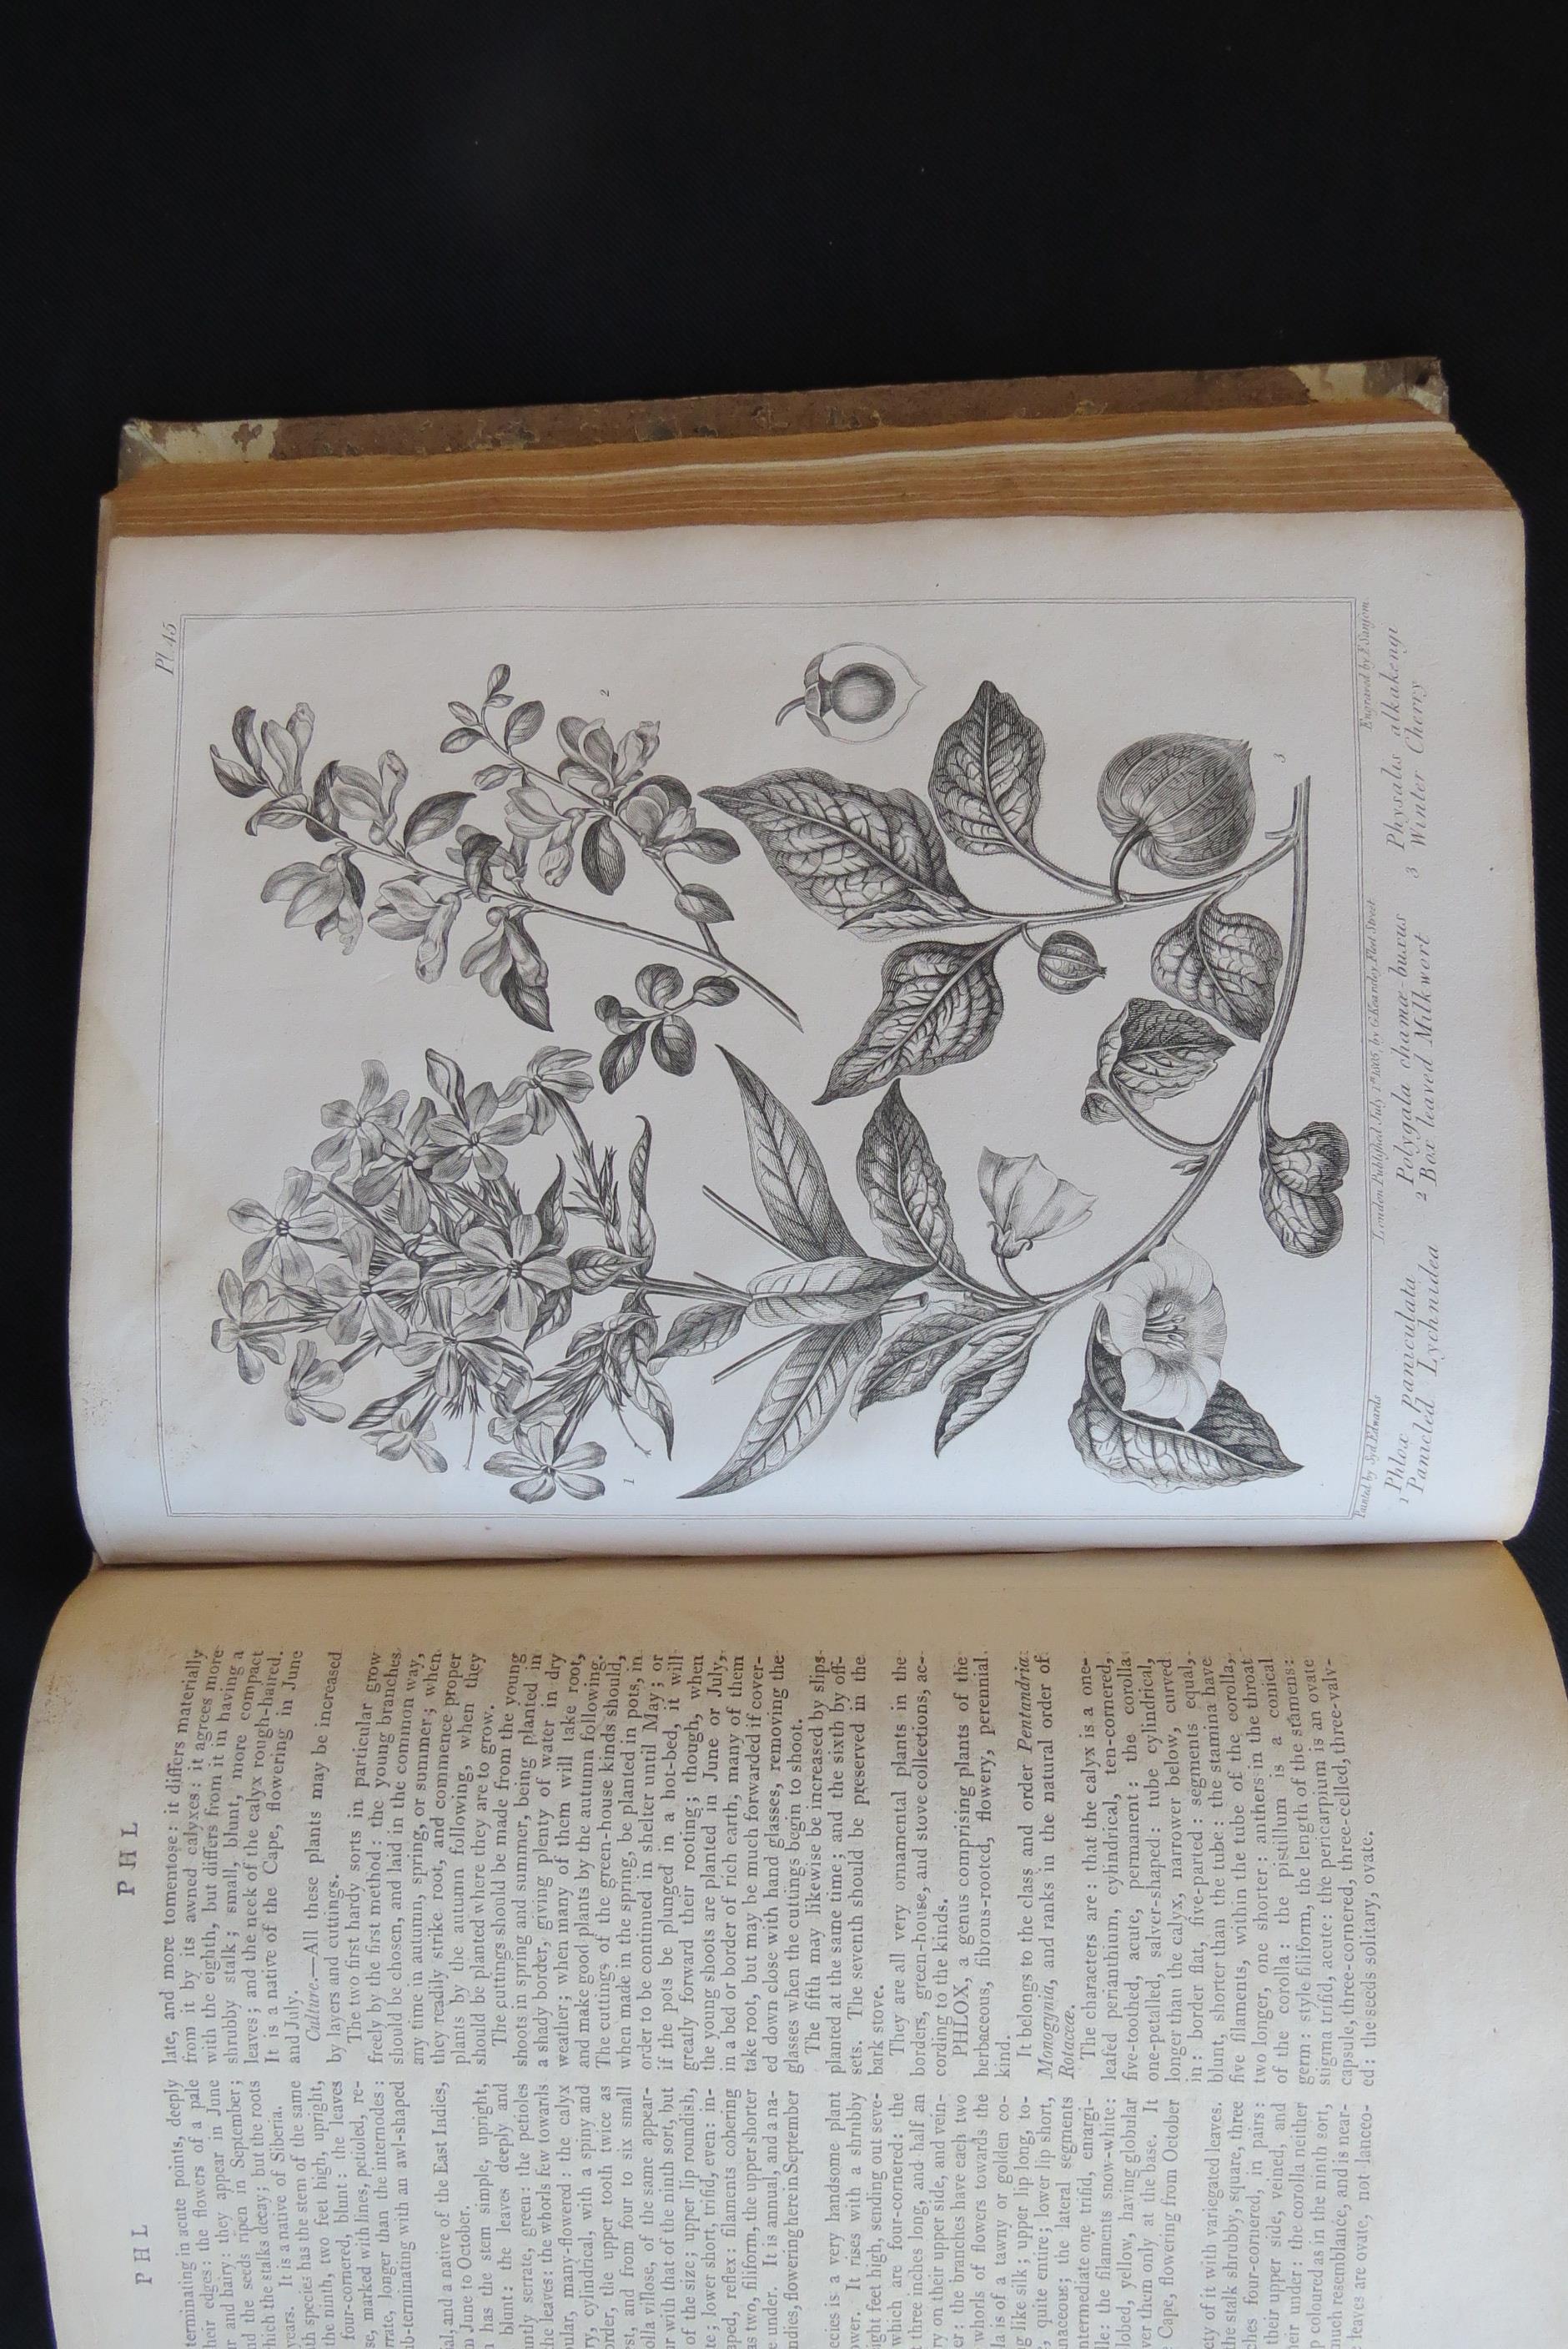 Alexander McDonald: 'A Complete Dictionary of Practical Gardening', London, George Kearsley, 1807, - Image 4 of 31